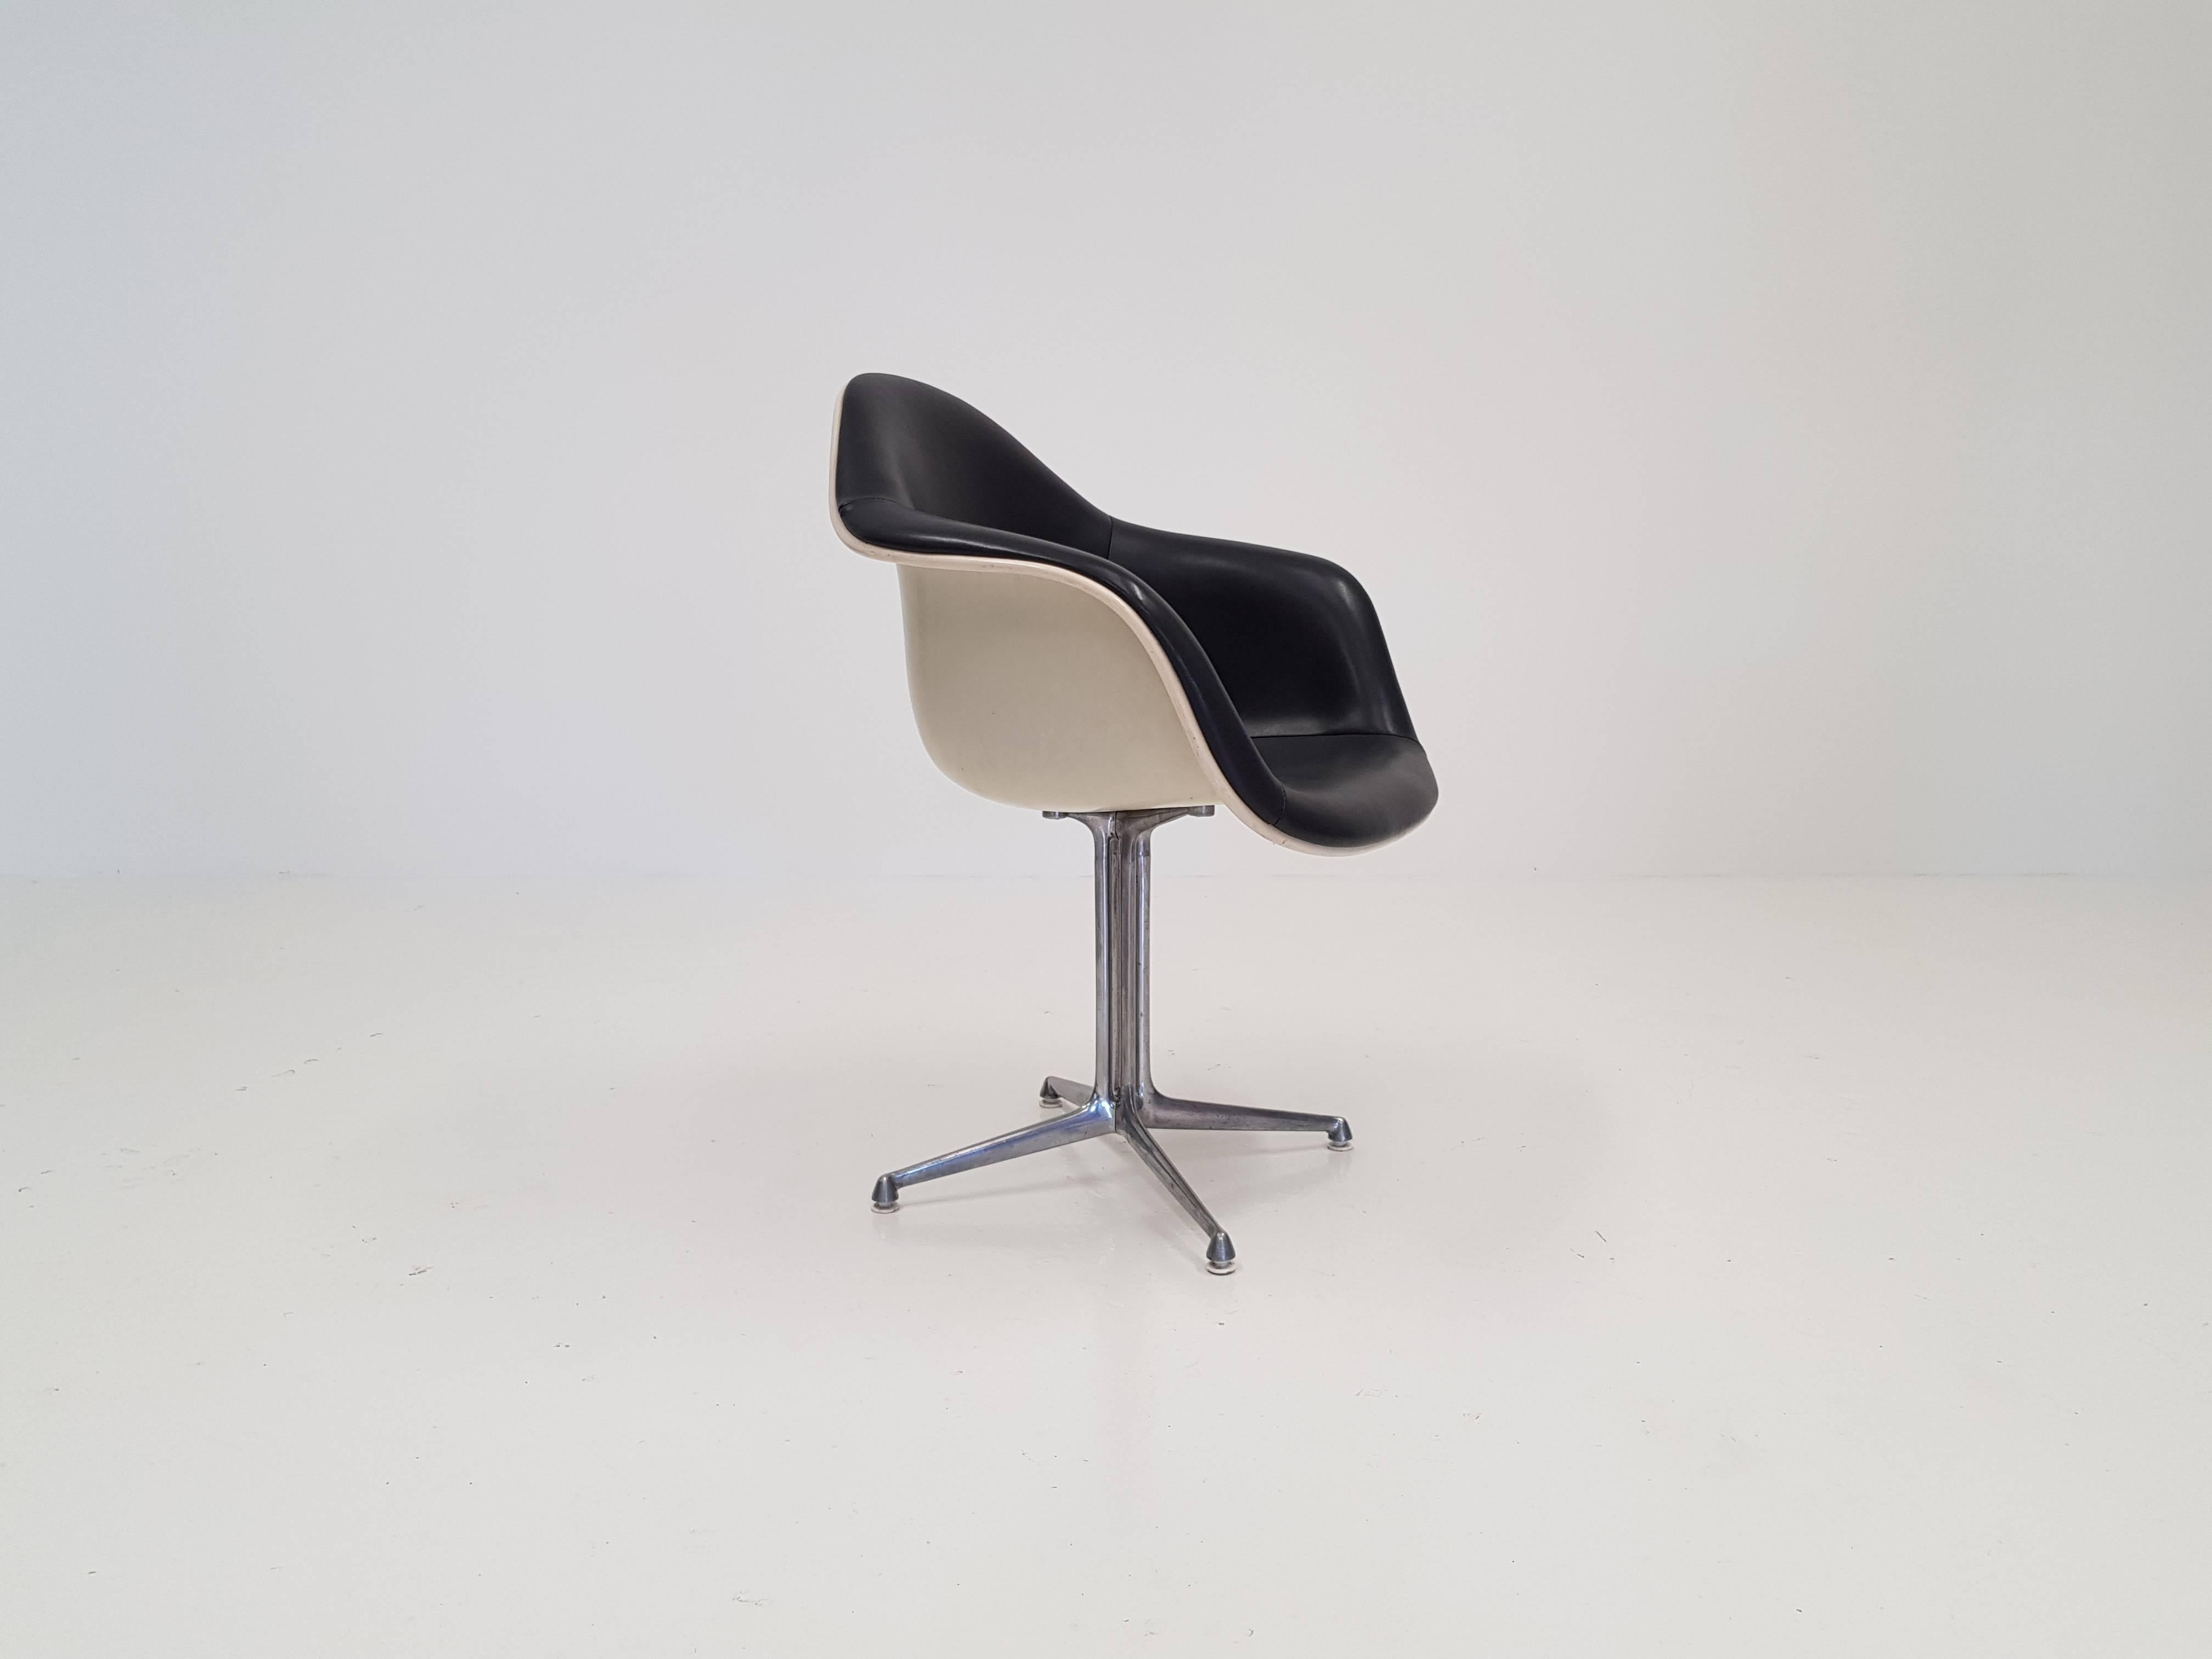 Eames 'La Fonda' chair. Aluminium frame with fibreglass shells and grey leatherette, Herman Miller.

We can offer very competitive global shipping rates - please 'ask the seller' to discuss further.